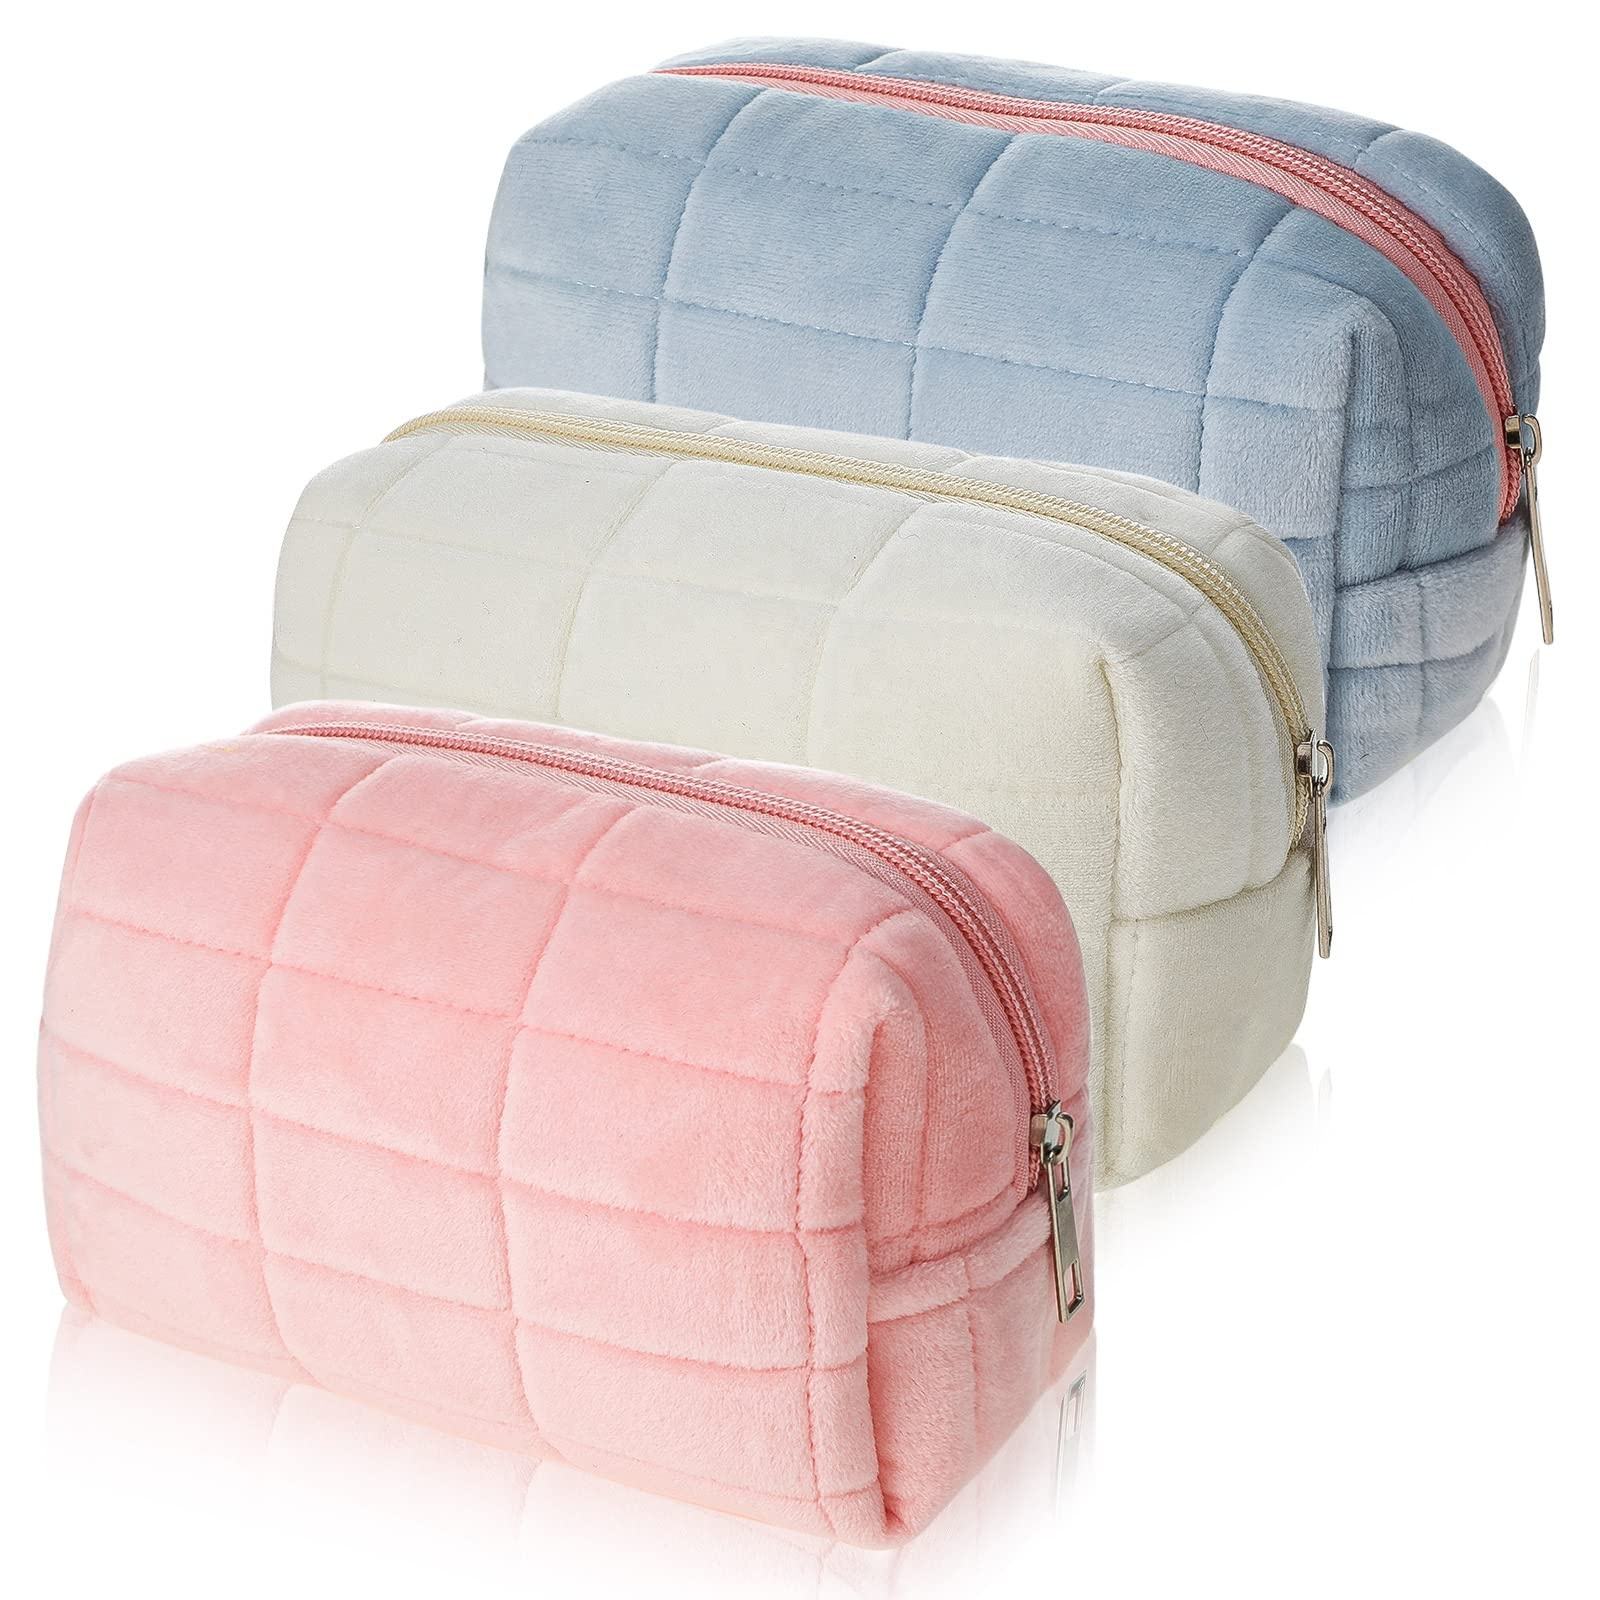 Colorful Softy Girls Cosmetic Packing Storage Bag Eco-friendly Designer Women Make up Bags